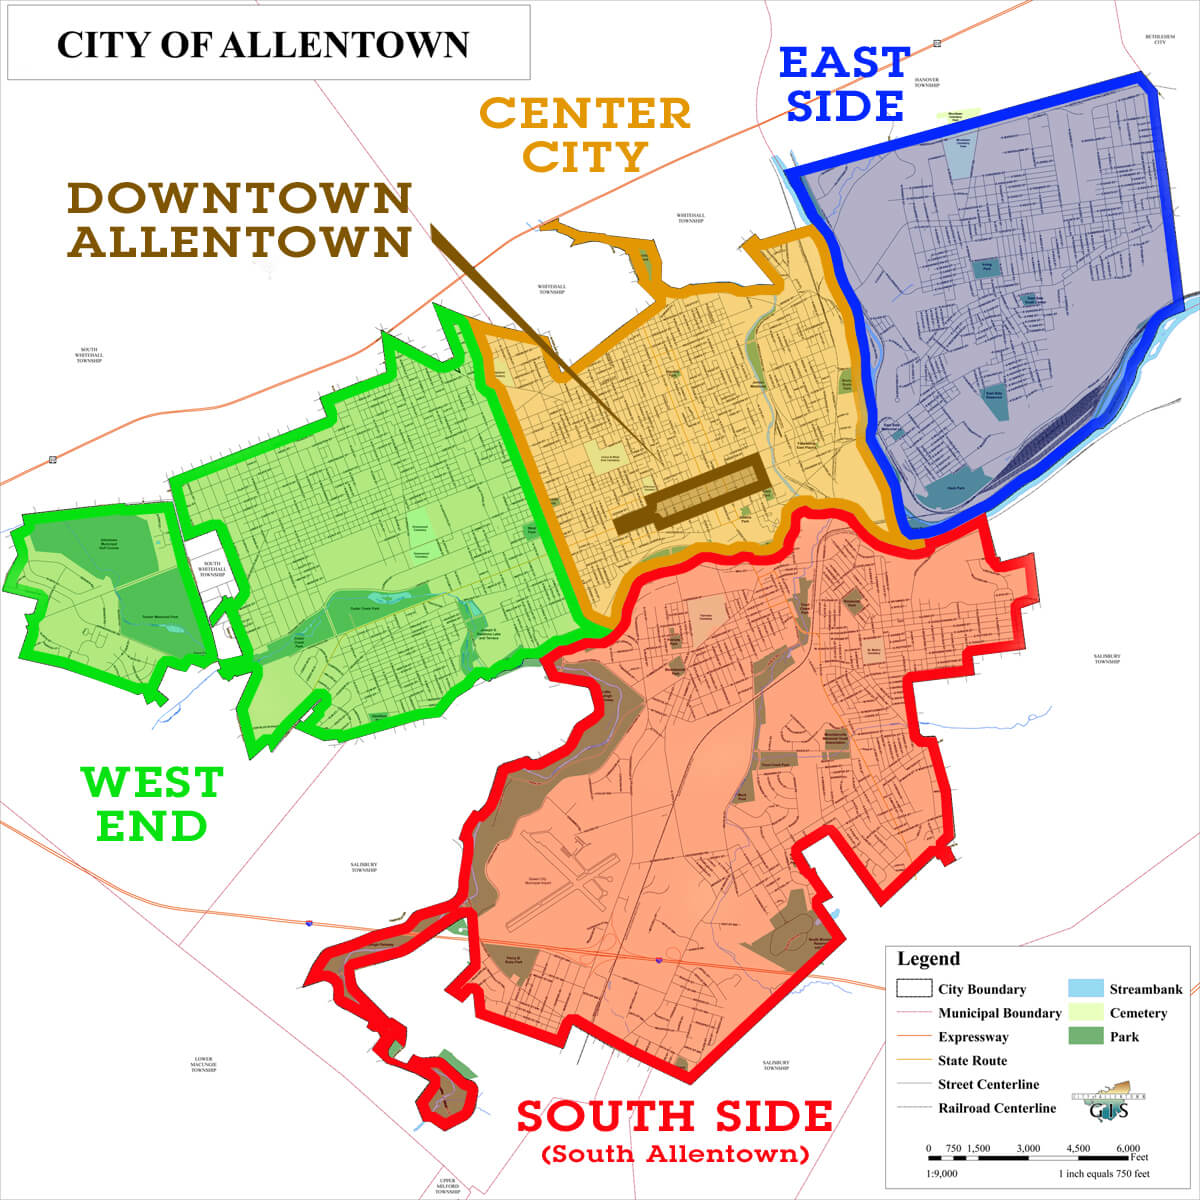 Map of Allentown City | Political, Geography And Road Map